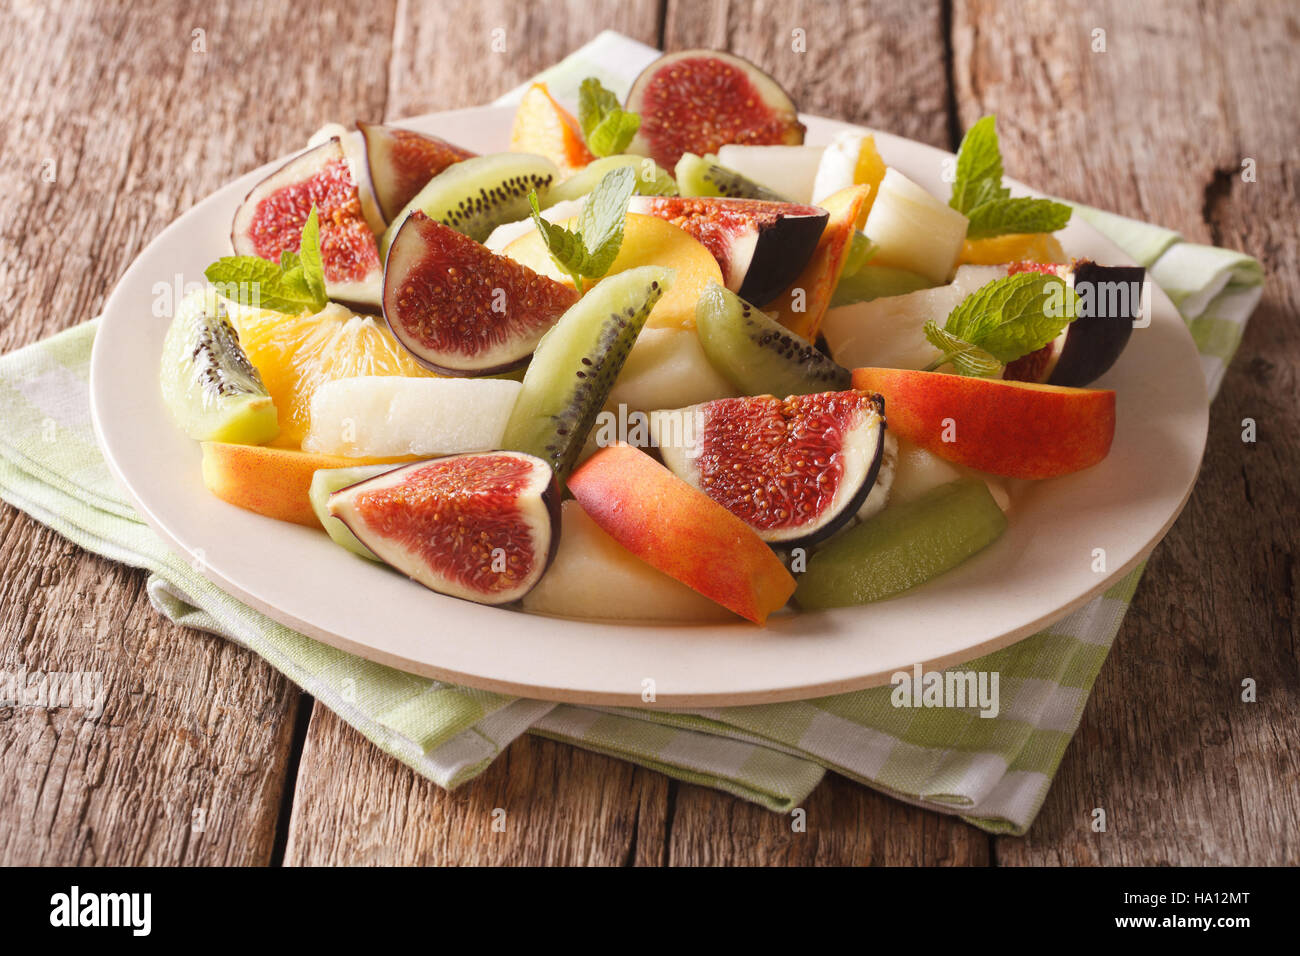 Salad of ripe fruit: figs, peaches, melons, kiwi and orange close-up on a plate. horizontal Stock Photo